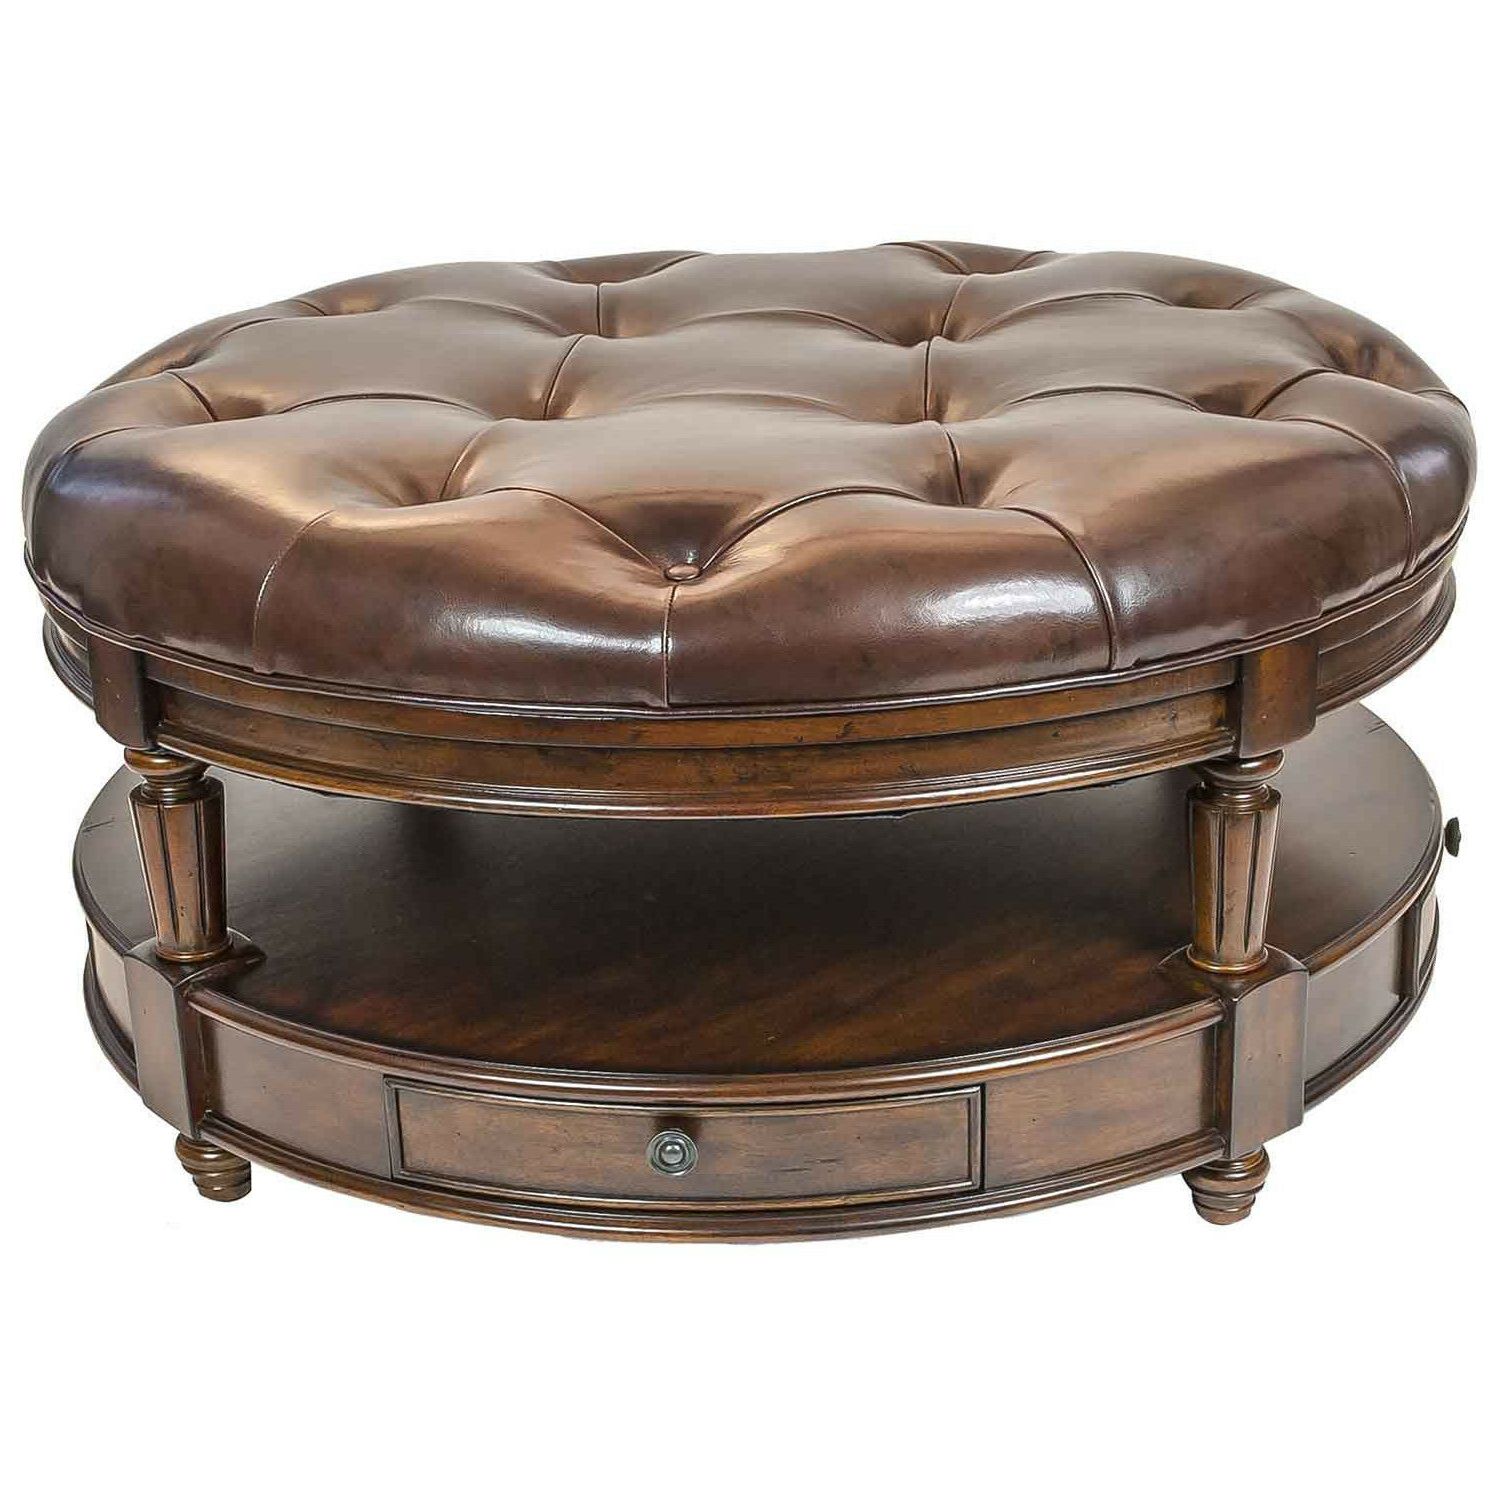 42''d Faux Leather Round Ottoman In Brown W/storage Drawers – Ottomans Pertaining To Most Recently Released Gold And White Leather Round Ottomans (View 2 of 10)